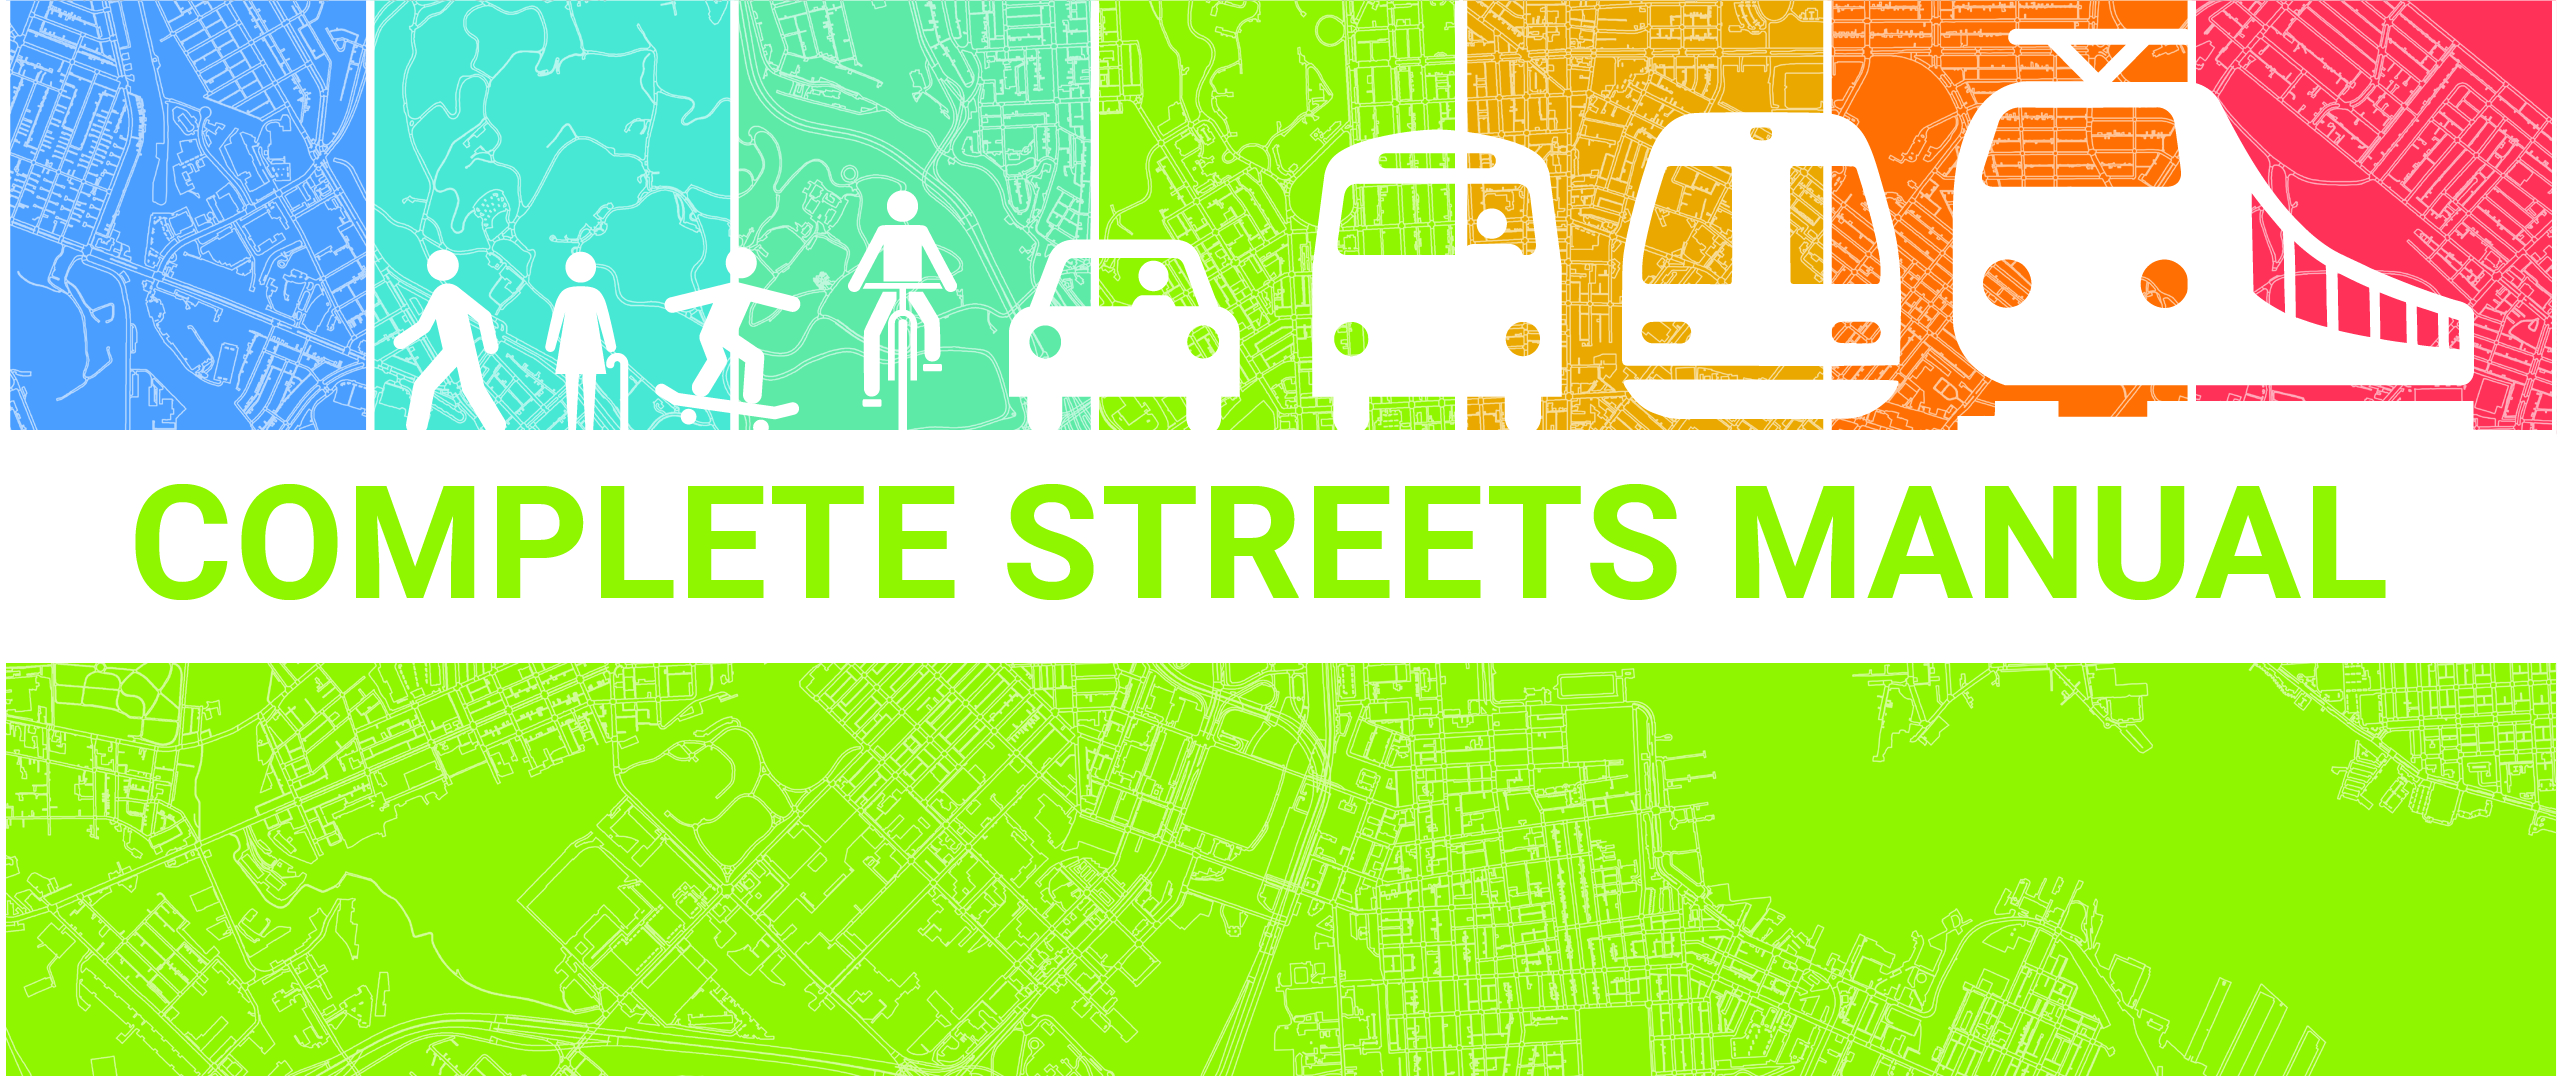 Complete Streets Manual March 2021